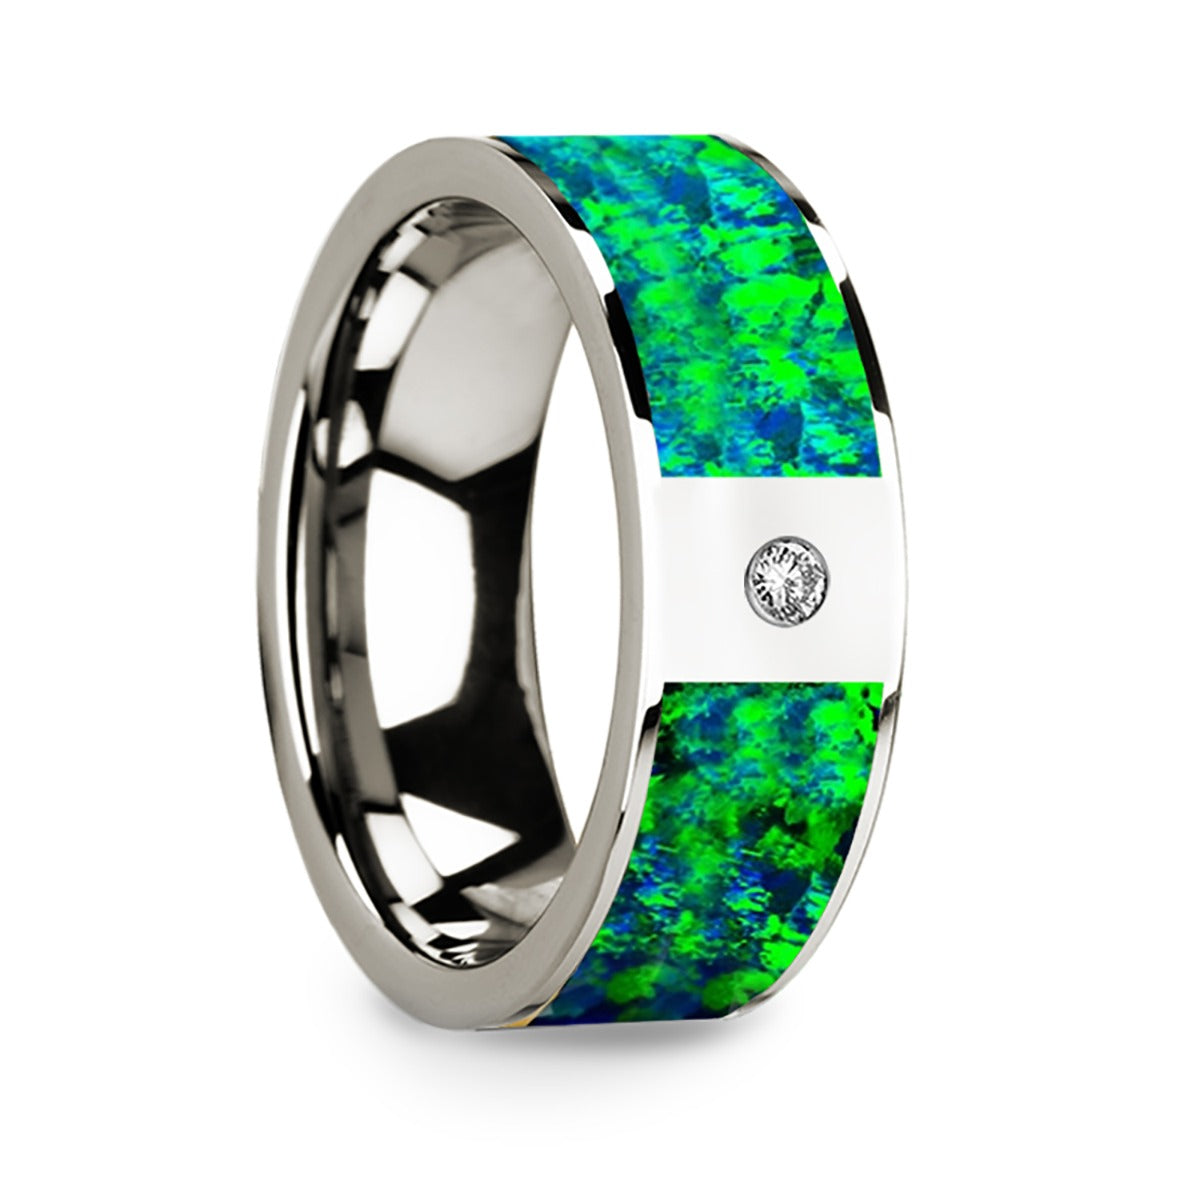 14k White Gold Men's Wedding Band with Green & Blue Opal Inlay and Diamond